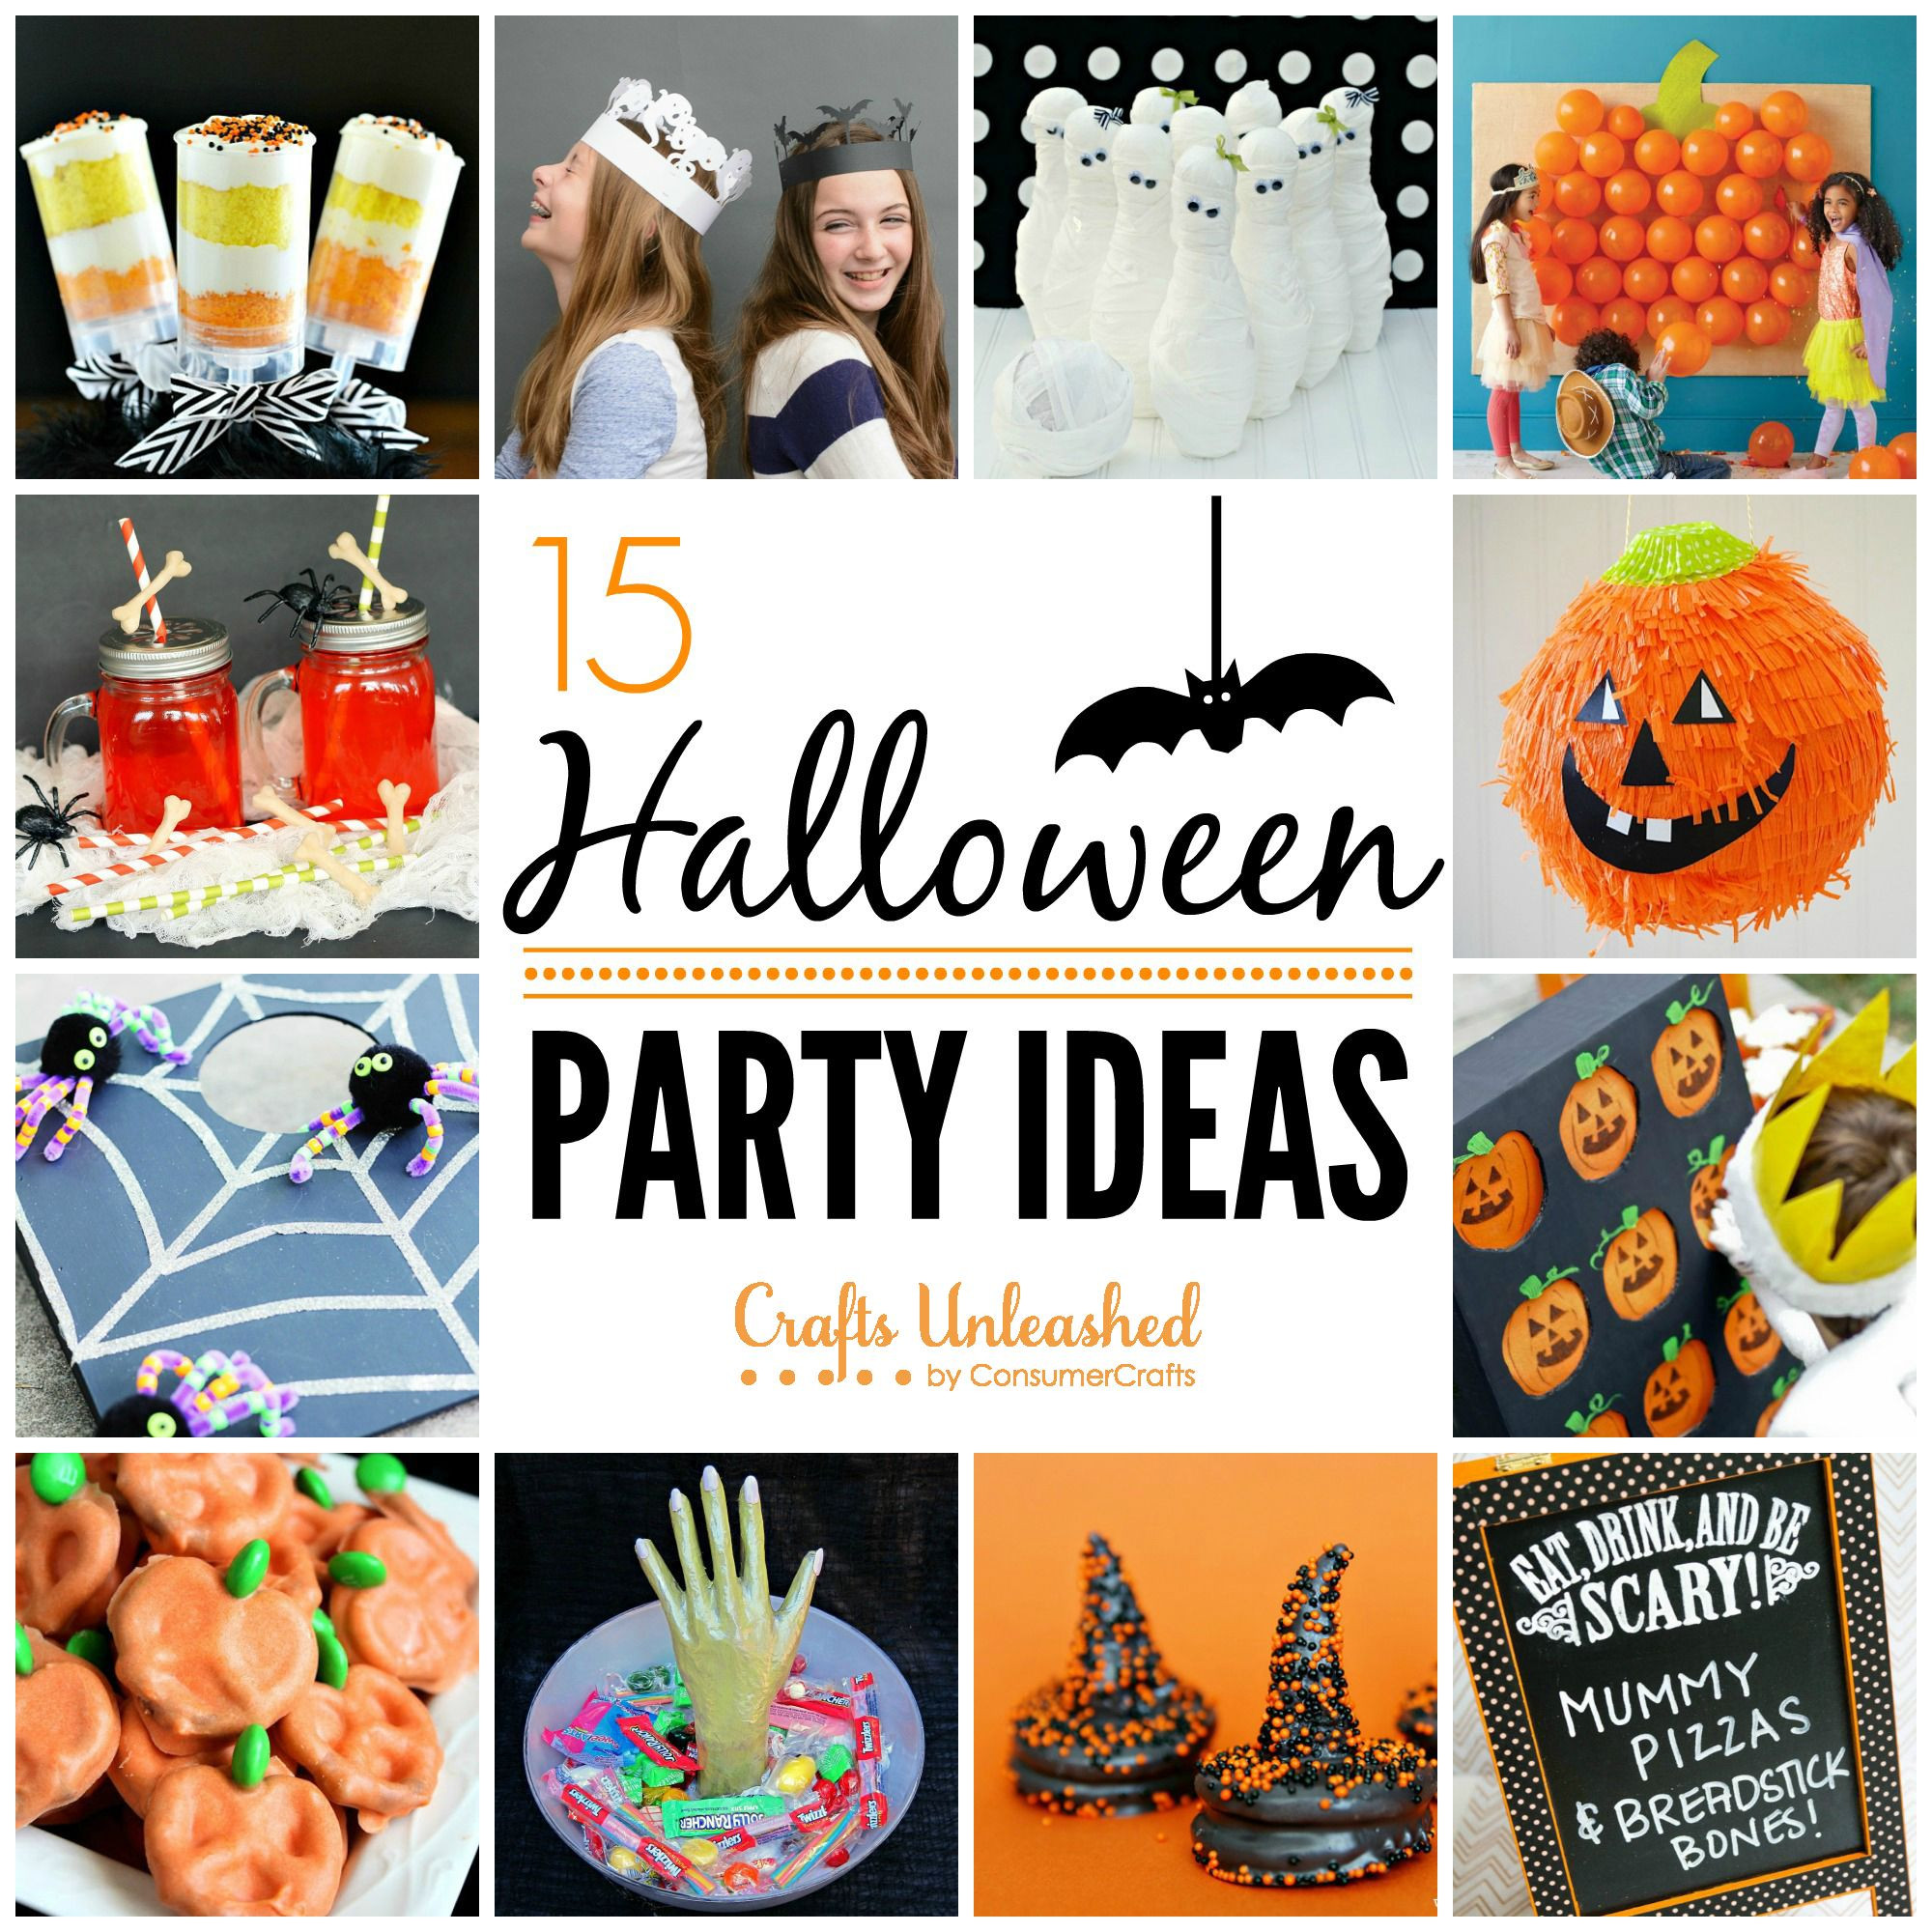 Outdoor Halloween Party Ideas For Adults
 Halloween Party Ideas Crafts Unleashed